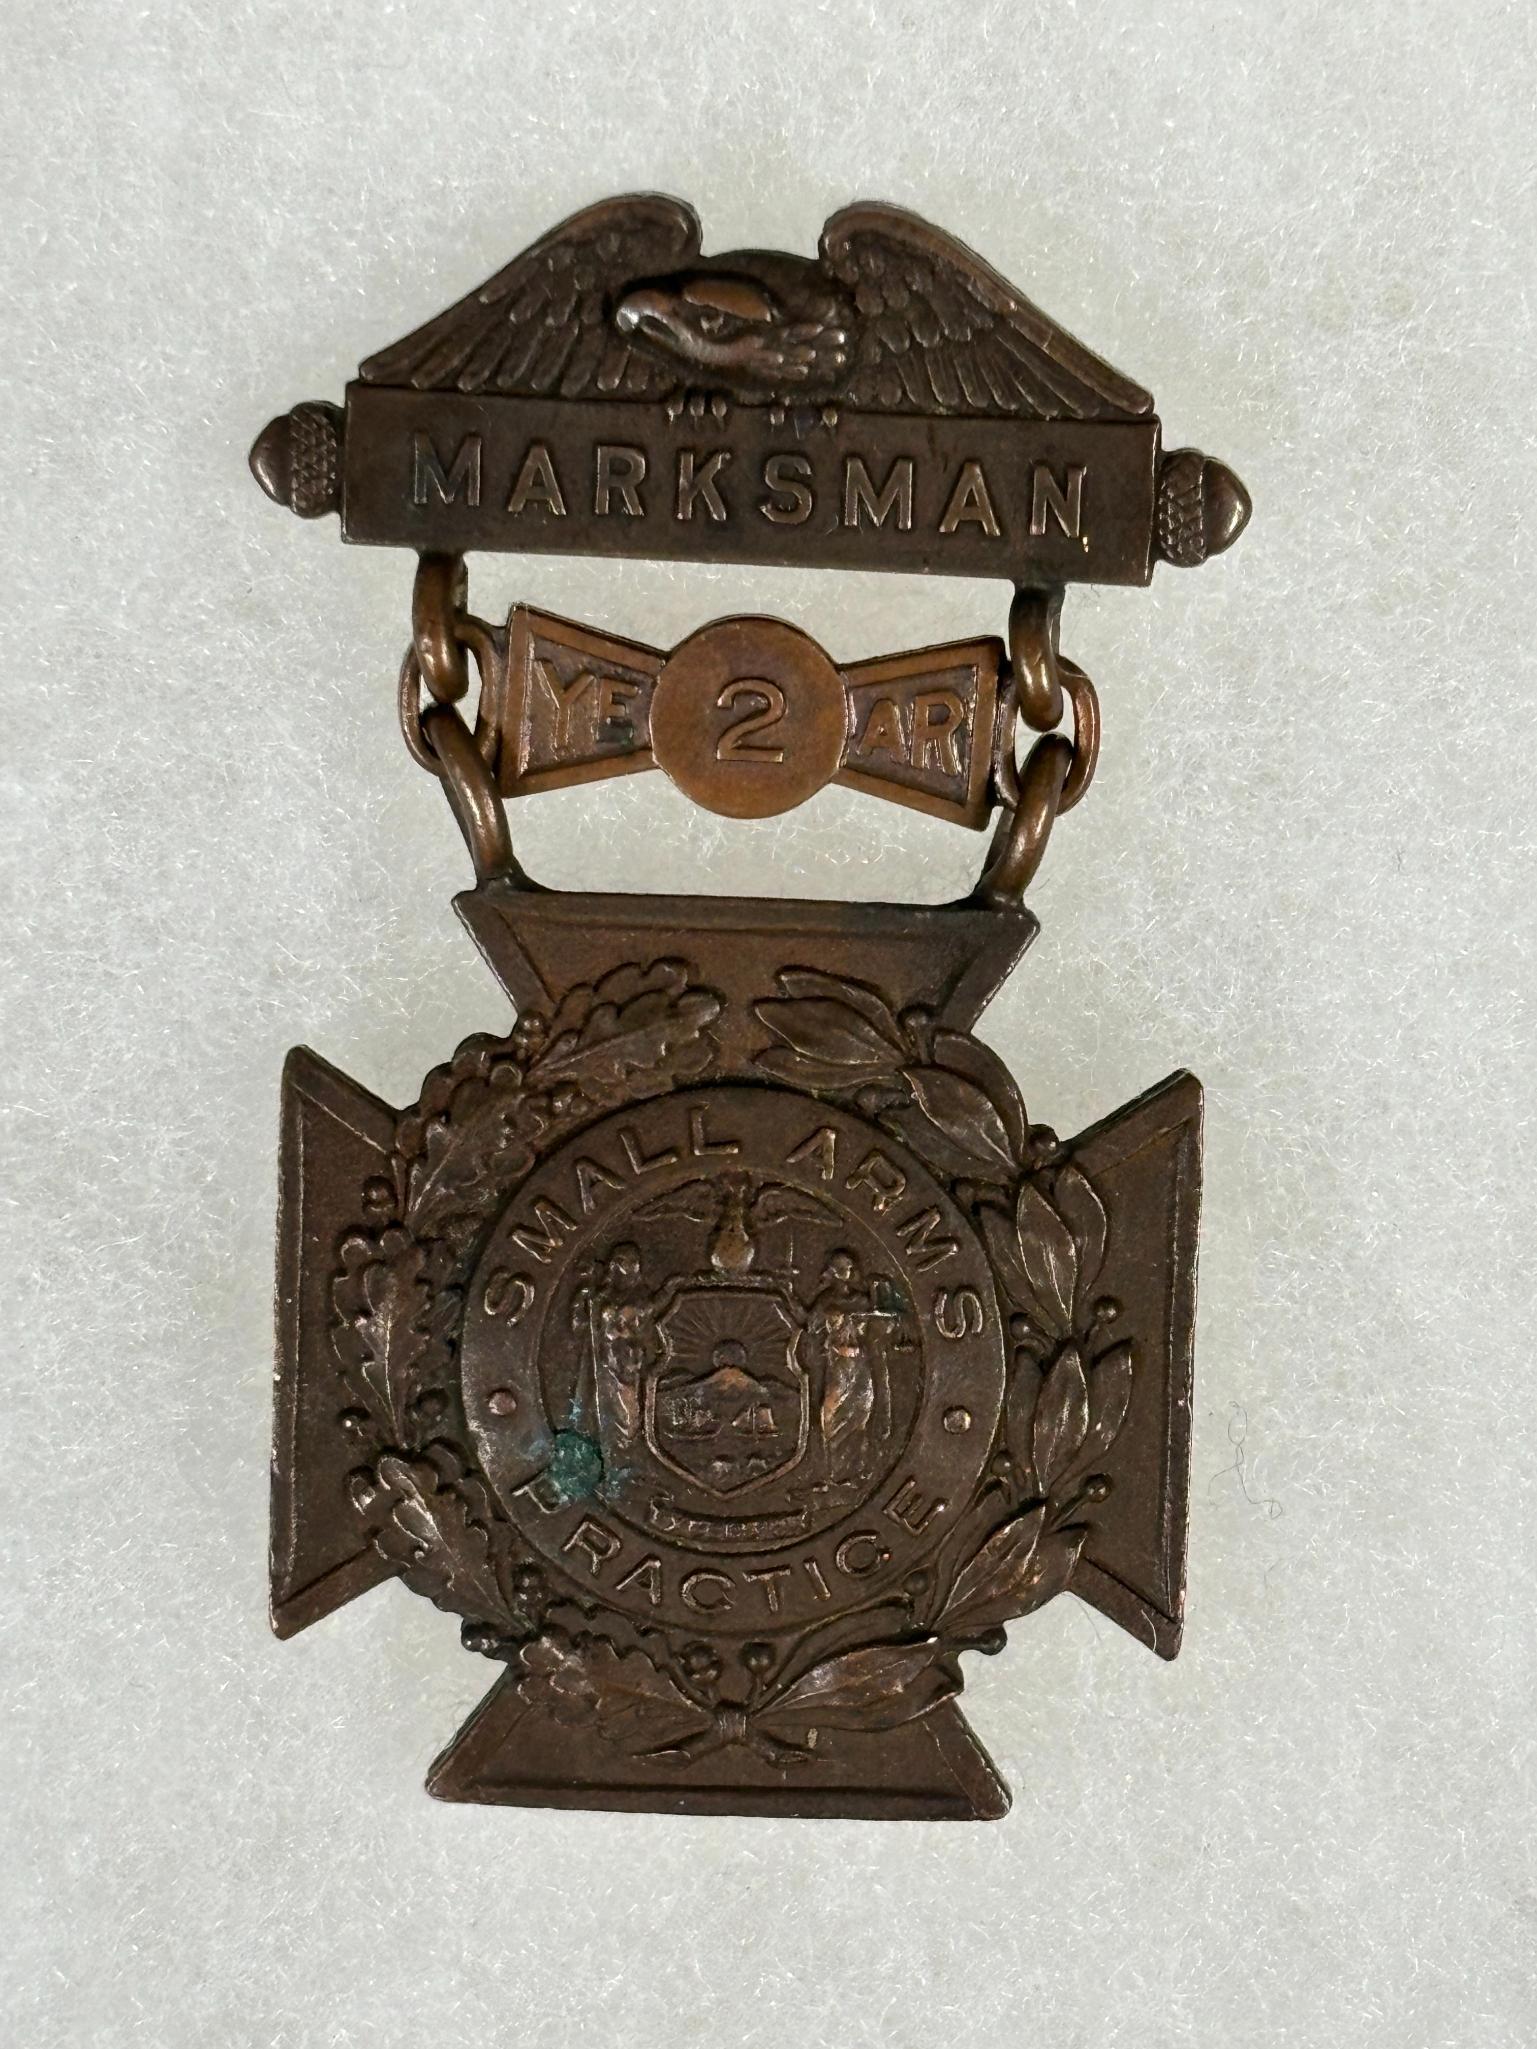 SPAN-AM NEW YORK NATIONAL GUARD MARKSMAN MEDALS 4 MADE BY TIFFANY & COMPANY